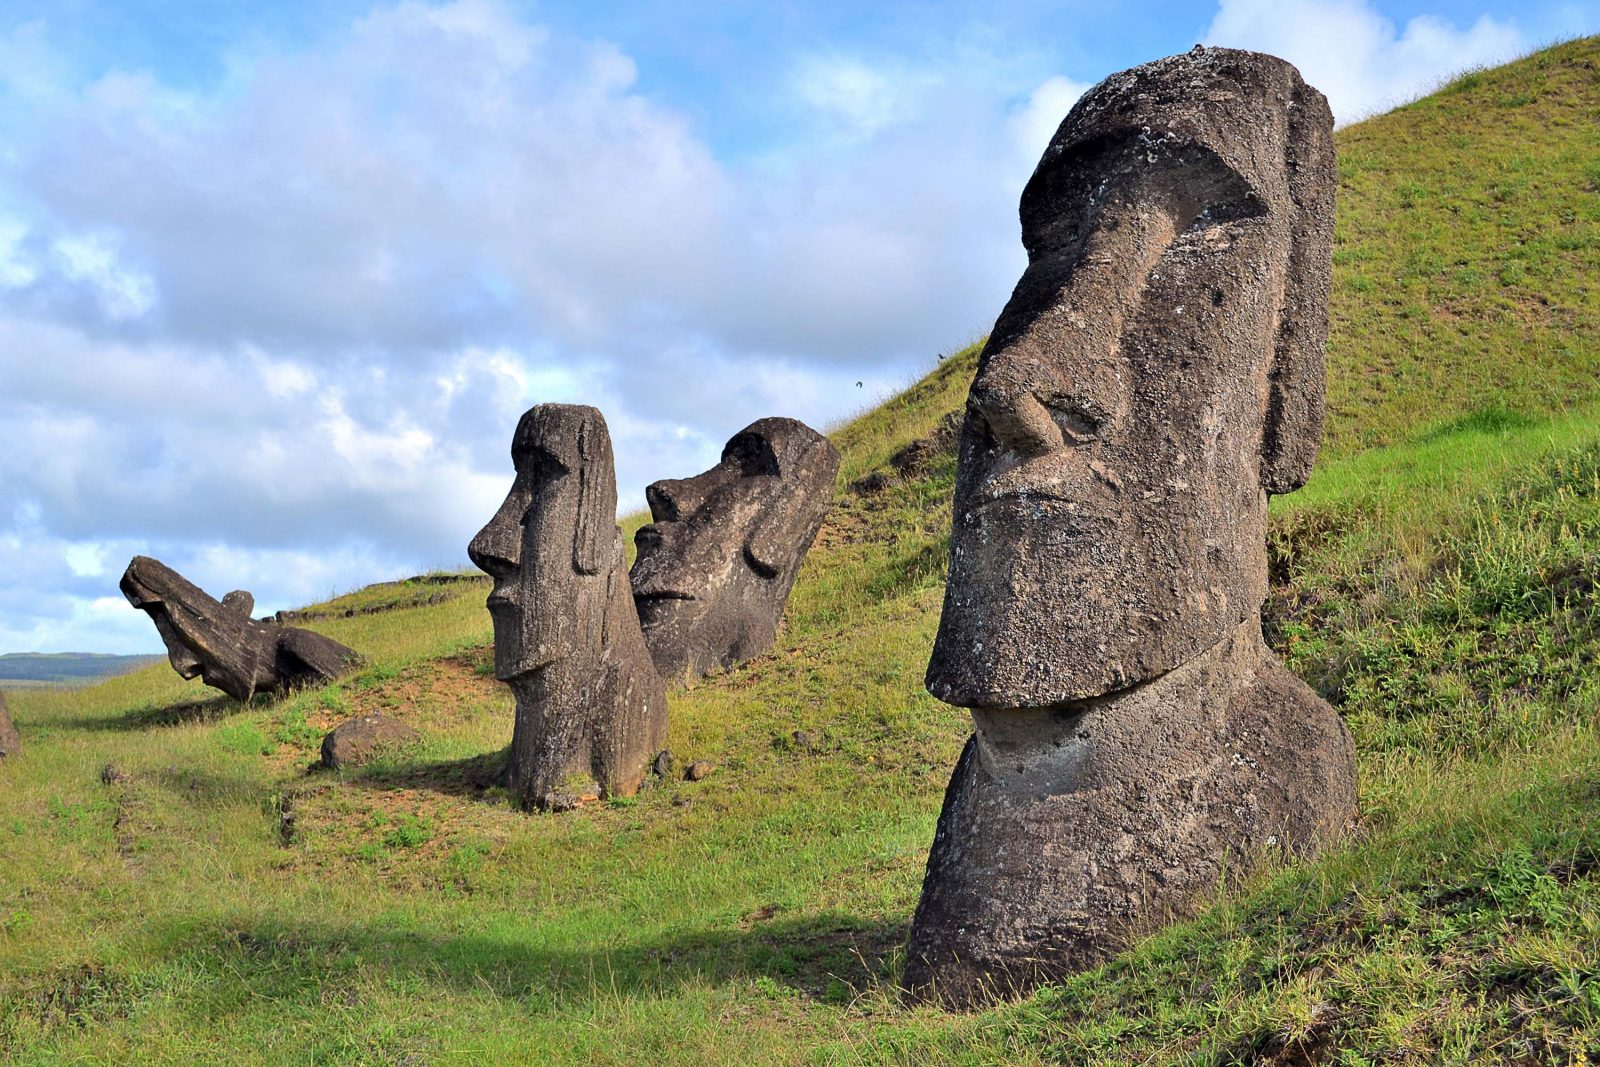 Even If You Don’t Know Much About Geography, Play This World Landmarks Quiz Anyway Easter Island Moai statues, Chile